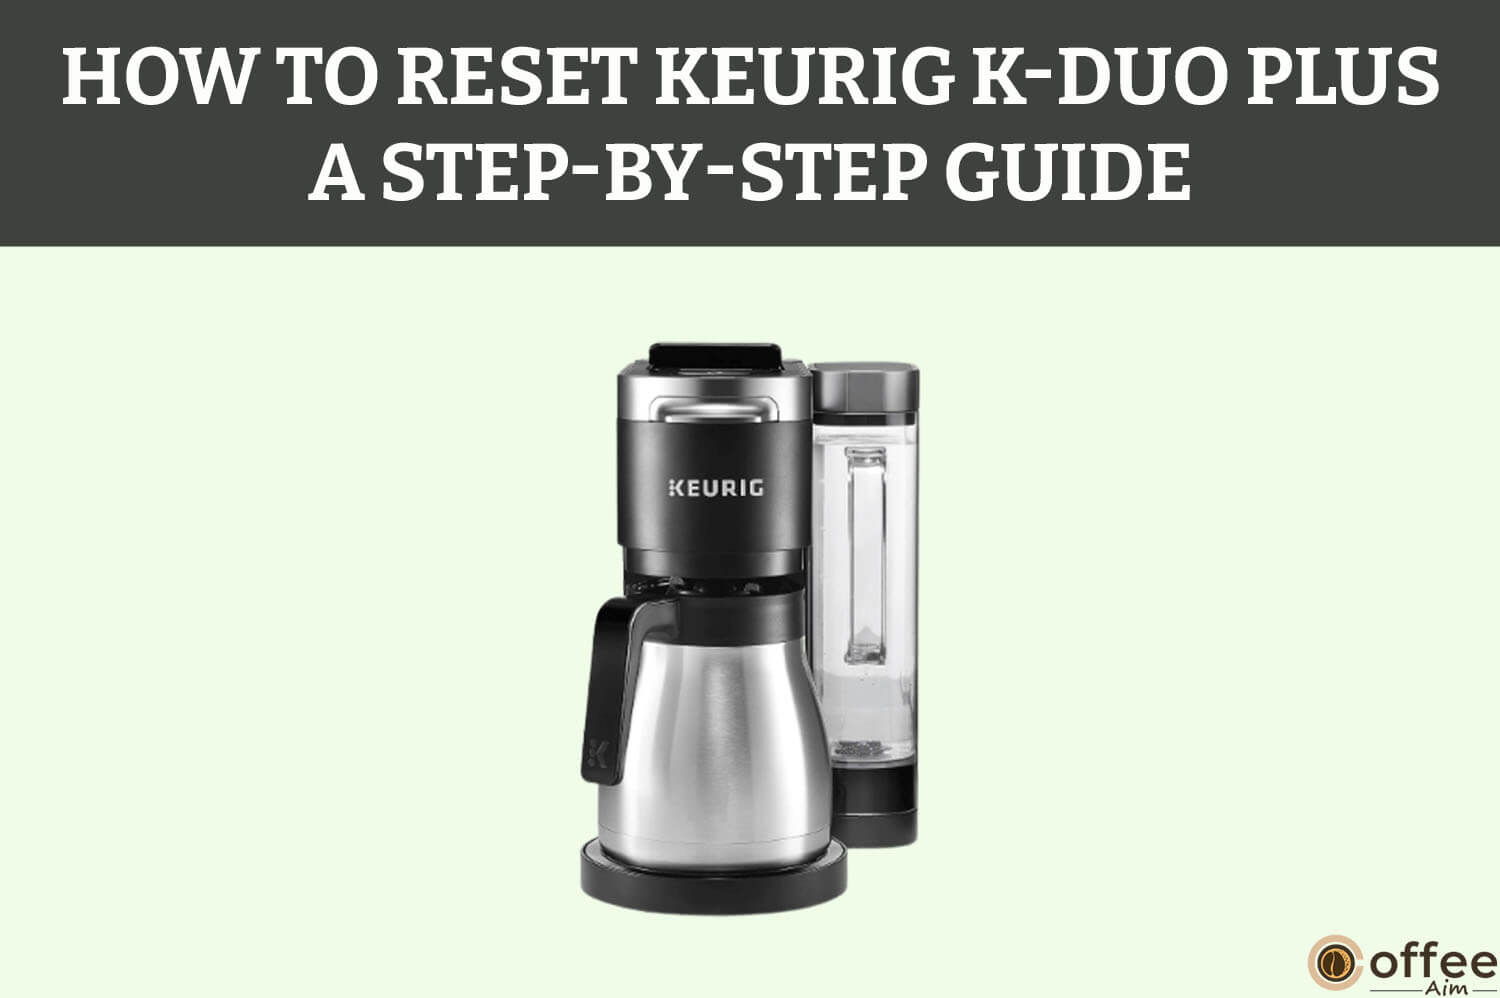 Featured image for the article "How to Reset Keurig K-Duo Plus — A Step-by-Step Guide"